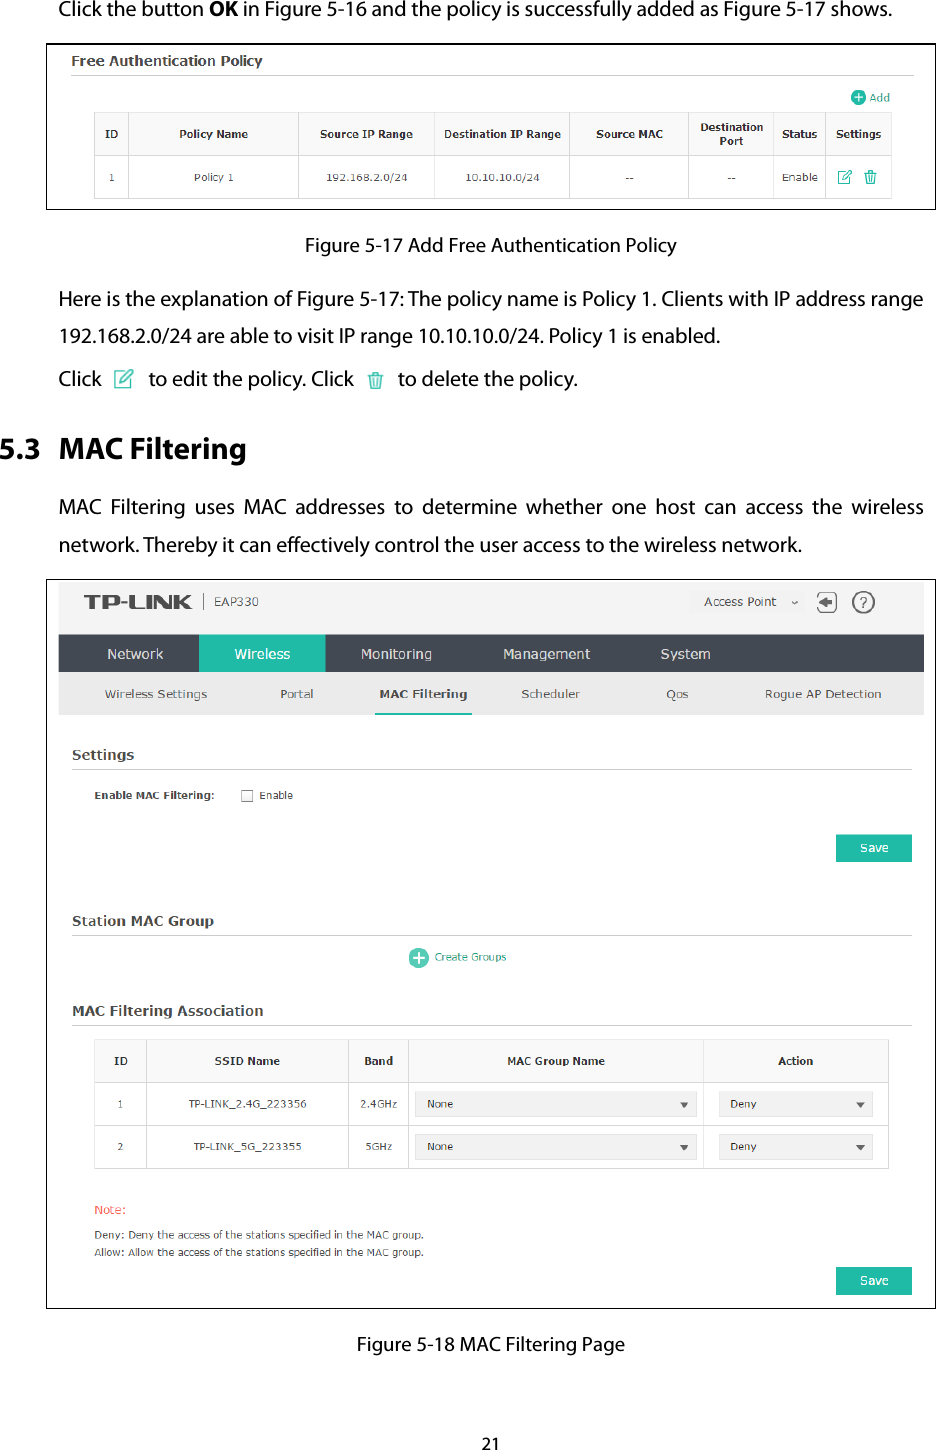 Click the button OK in Figure 5-16 and the policy is successfully added as Figure 5-17 shows.  Figure 5-17 Add Free Authentication Policy Here is the explanation of Figure 5-17: The policy name is Policy 1. Clients with IP address range 192.168.2.0/24 are able to visit IP range 10.10.10.0/24. Policy 1 is enabled. Click   to edit the policy. Click   to delete the policy. 5.3 MAC Filtering MAC Filtering uses MAC addresses to determine whether one host can access the wireless network. Thereby it can effectively control the user access to the wireless network.    Figure 5-18 MAC Filtering Page 21  